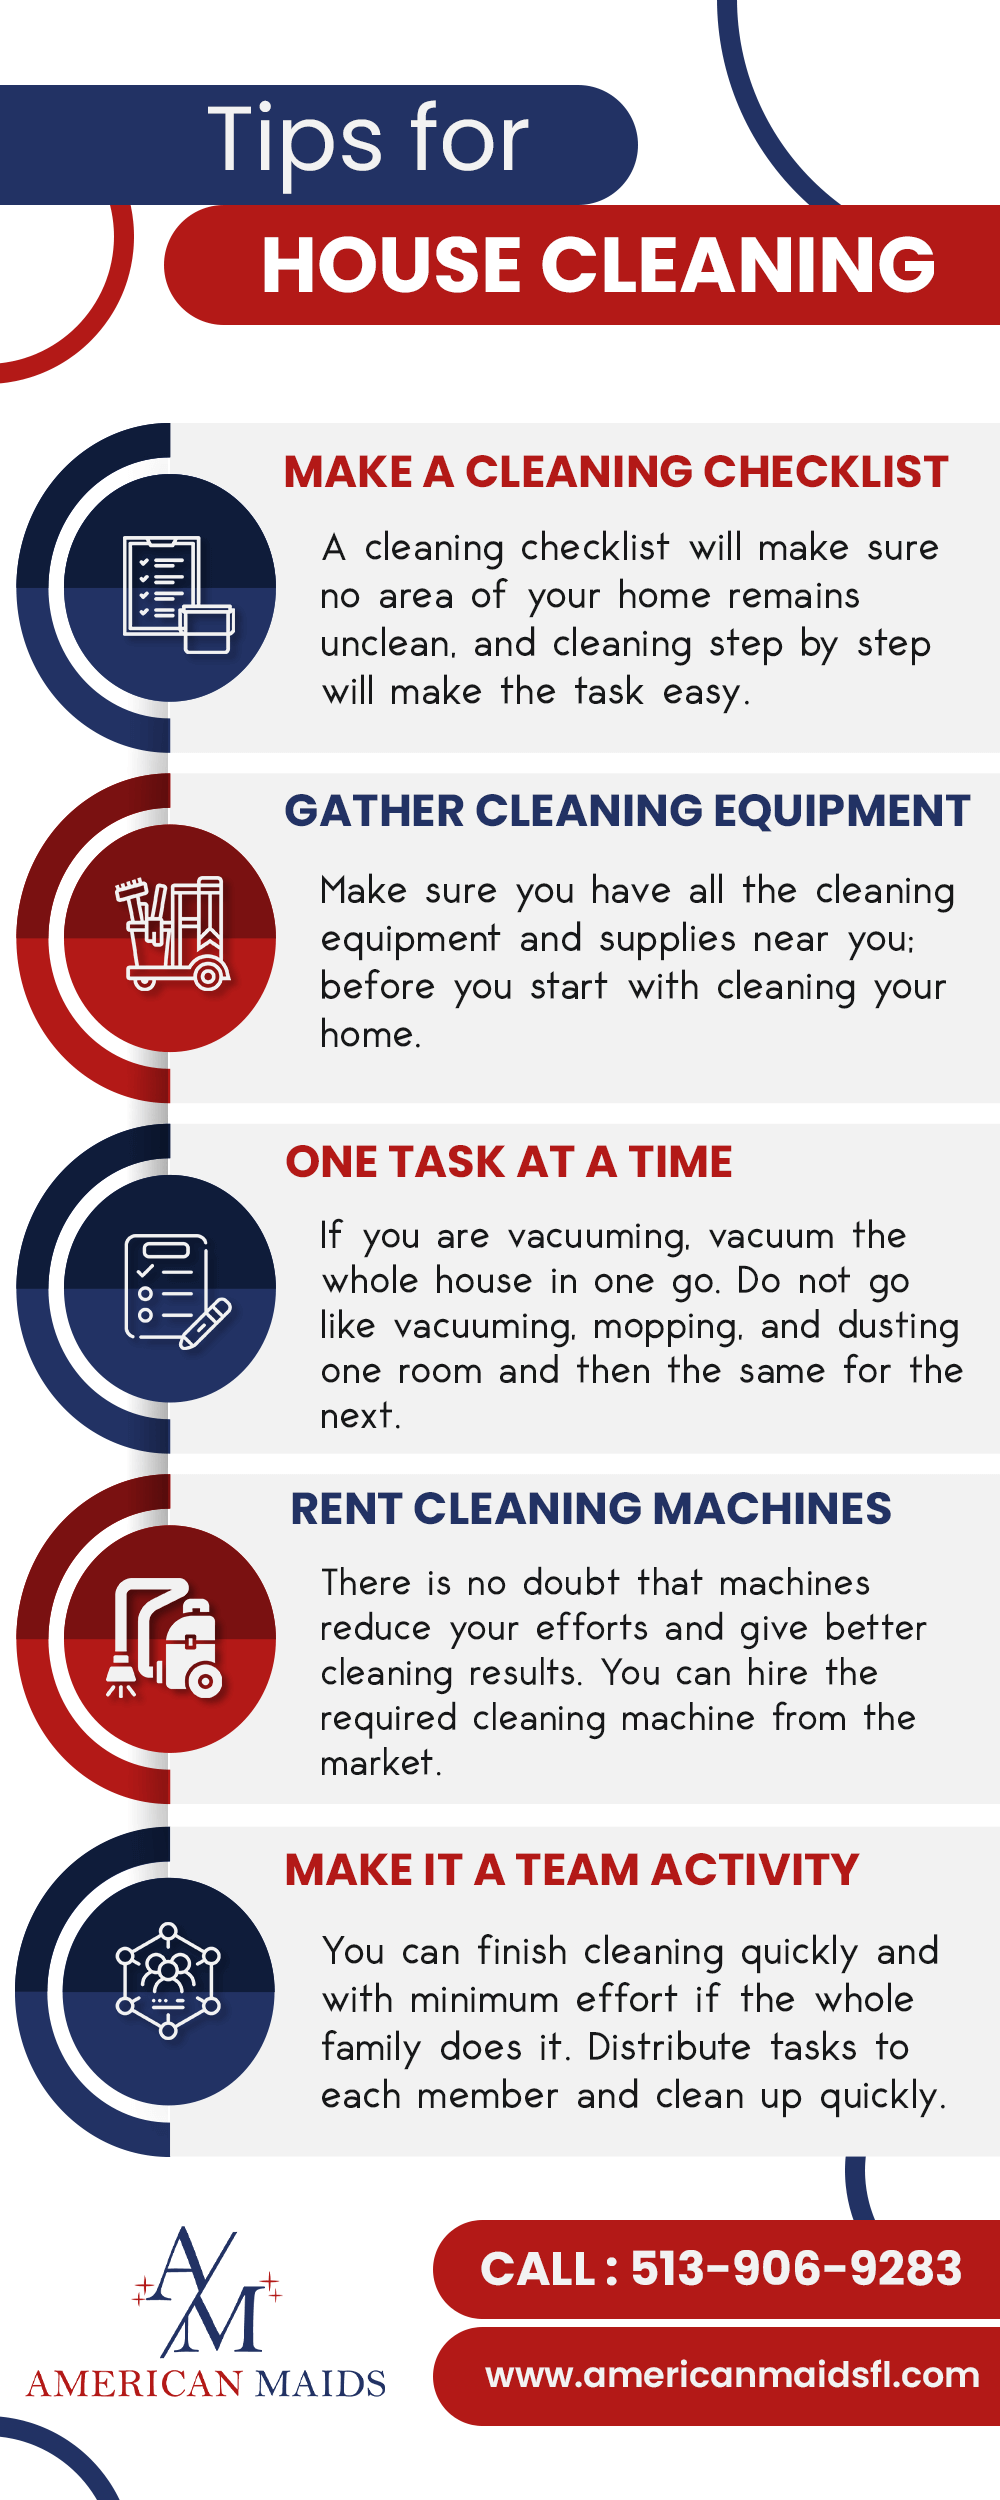 Tips for House Cleaning